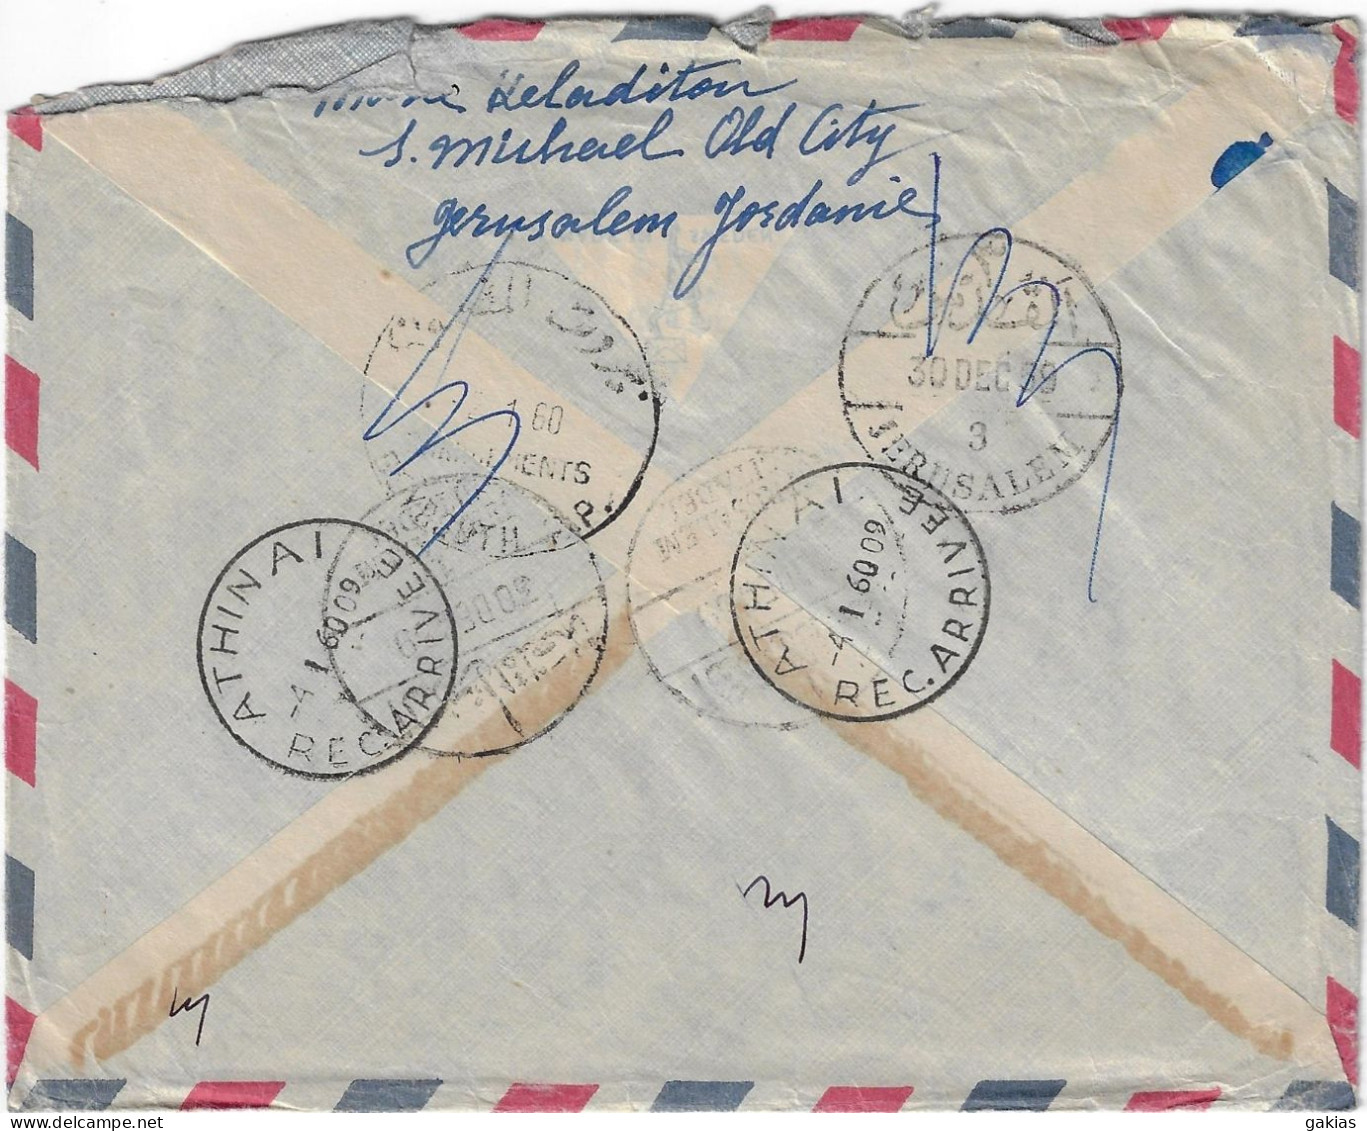 GREECE/ARRIVAL, 30-12-1959 REG. AIR COVER JERUSALEM/JORDAN VIA BEYROUTH TO ATHENS. WITH CONTENTS. - Covers & Documents